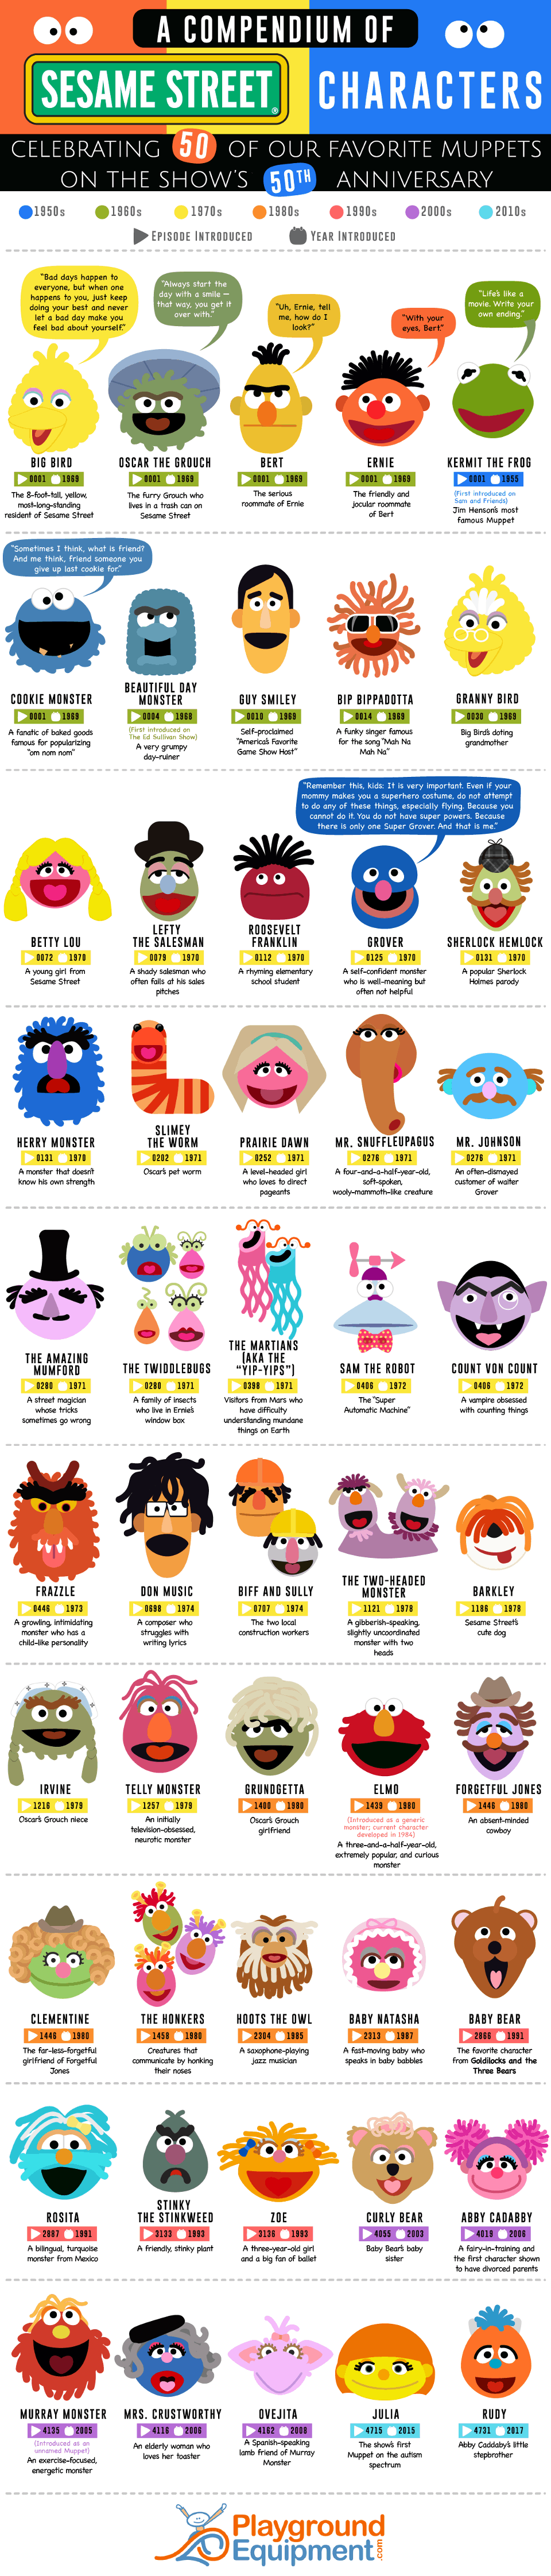 A Compendium of 50 Sesame Street Characters